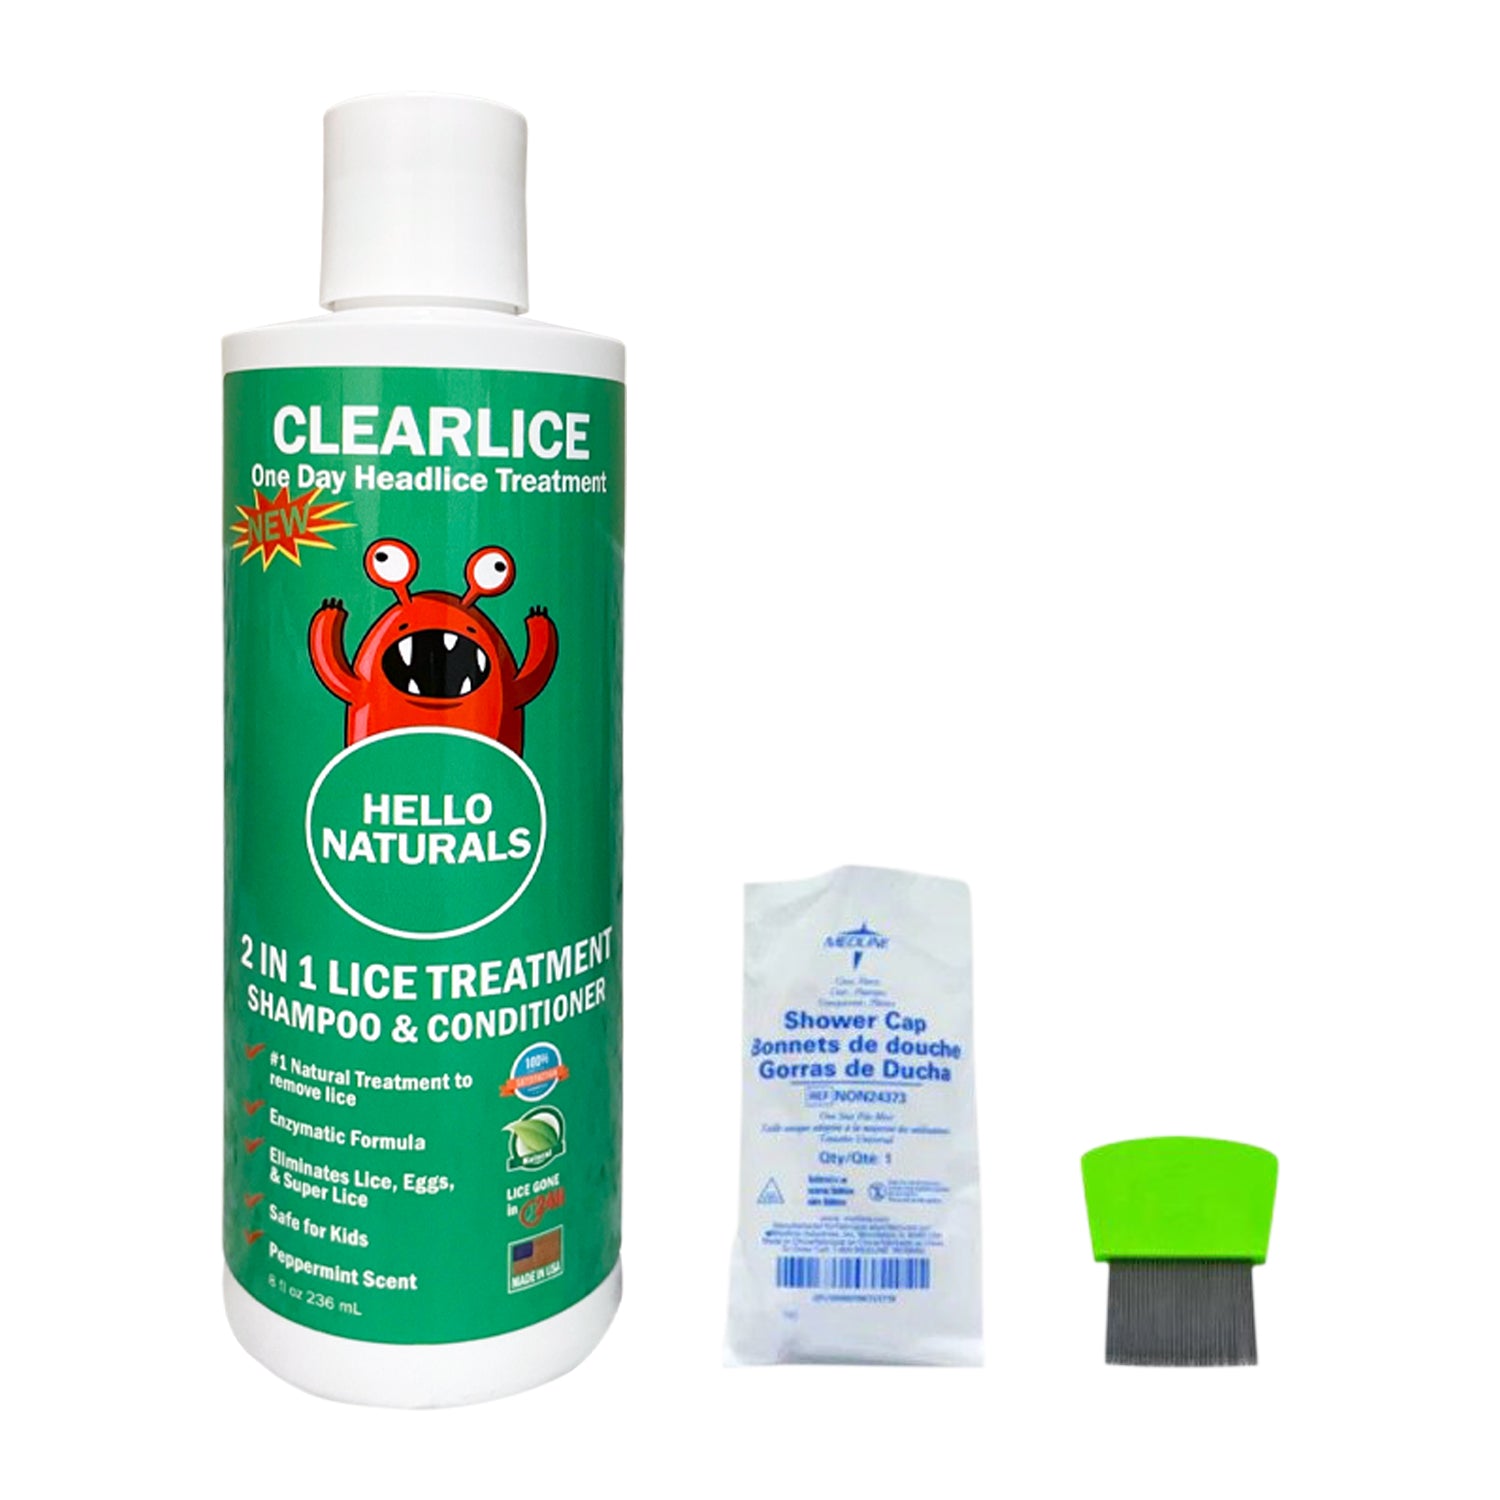 2 in 1 ClearLice Treatment Kit